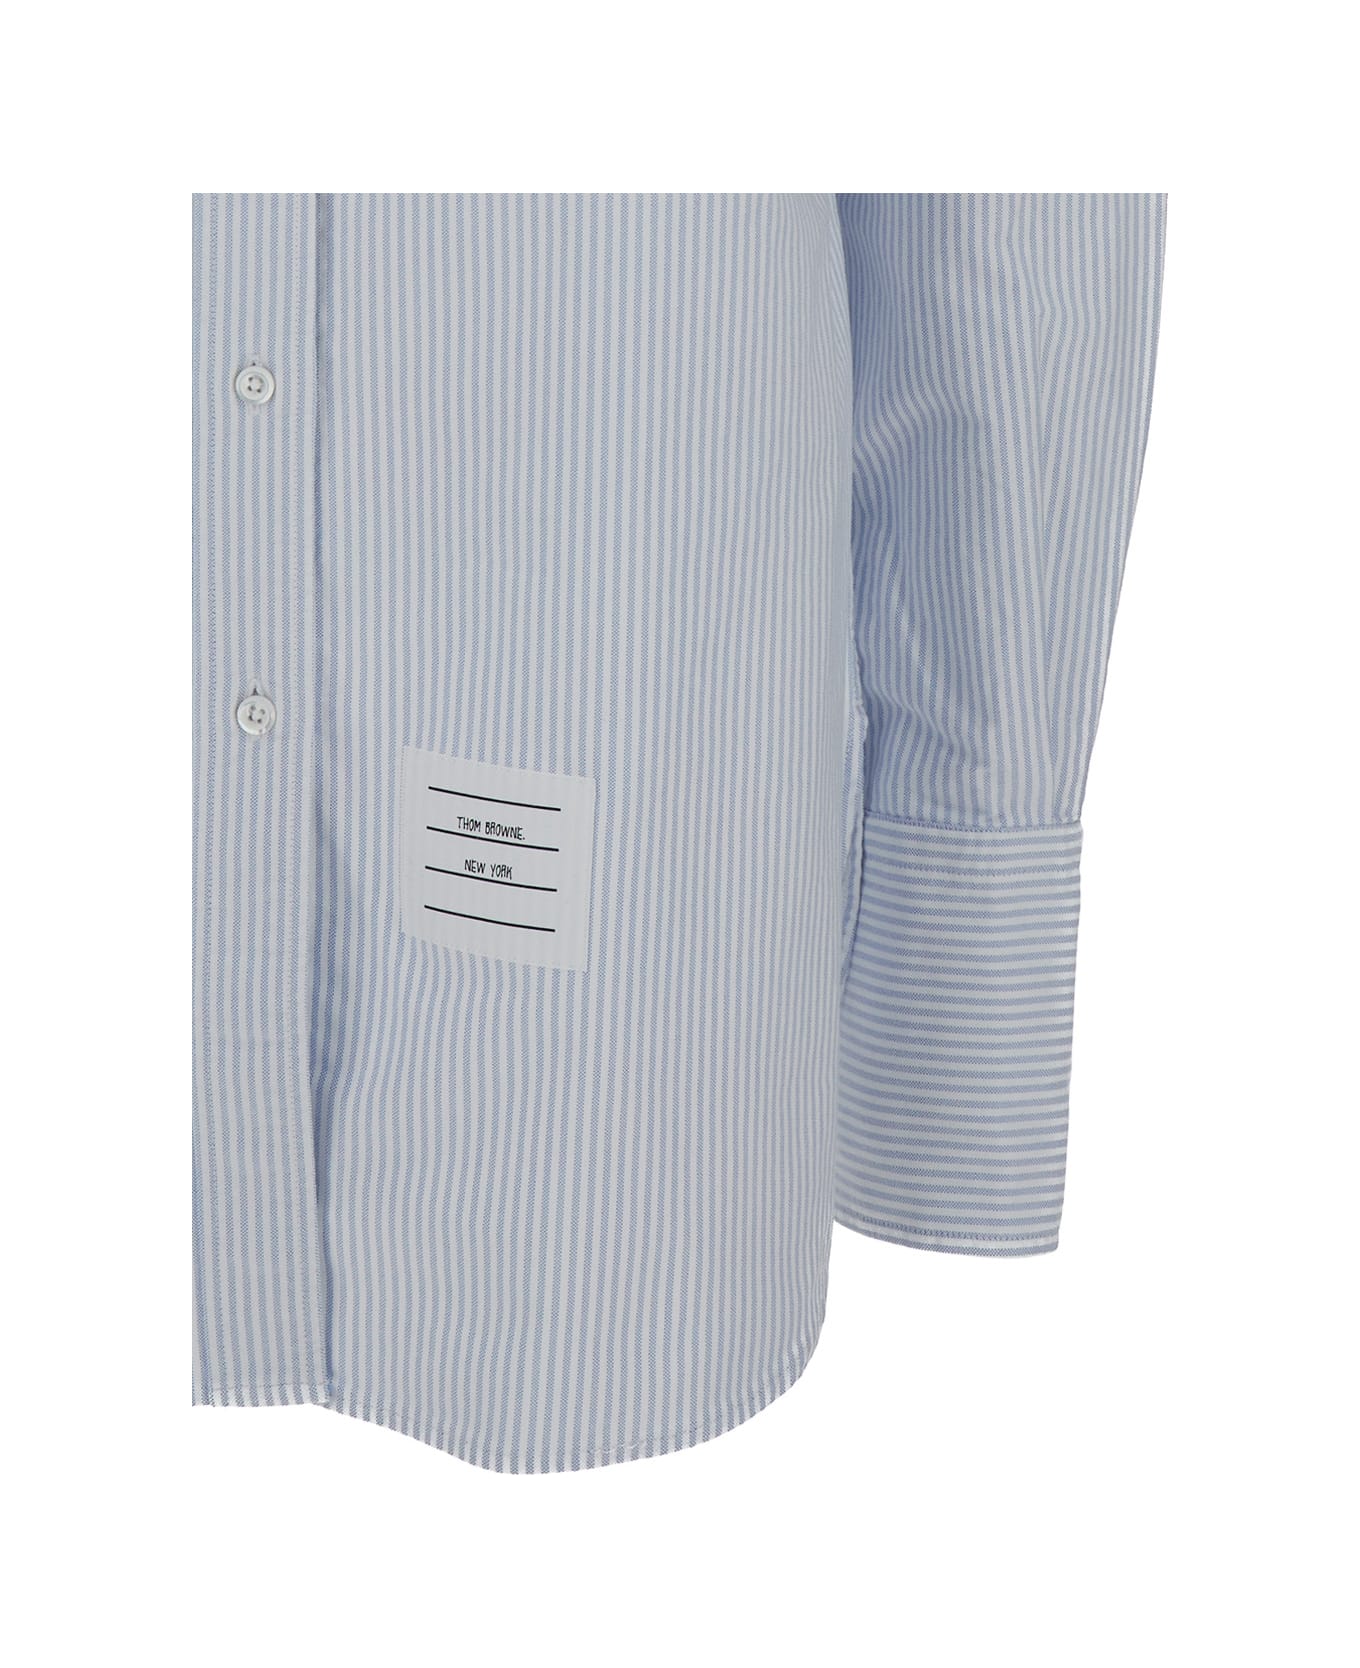 Thom Browne Light Blue Striped Shirt With 4bar Detail In Cotton Woman - Light blue